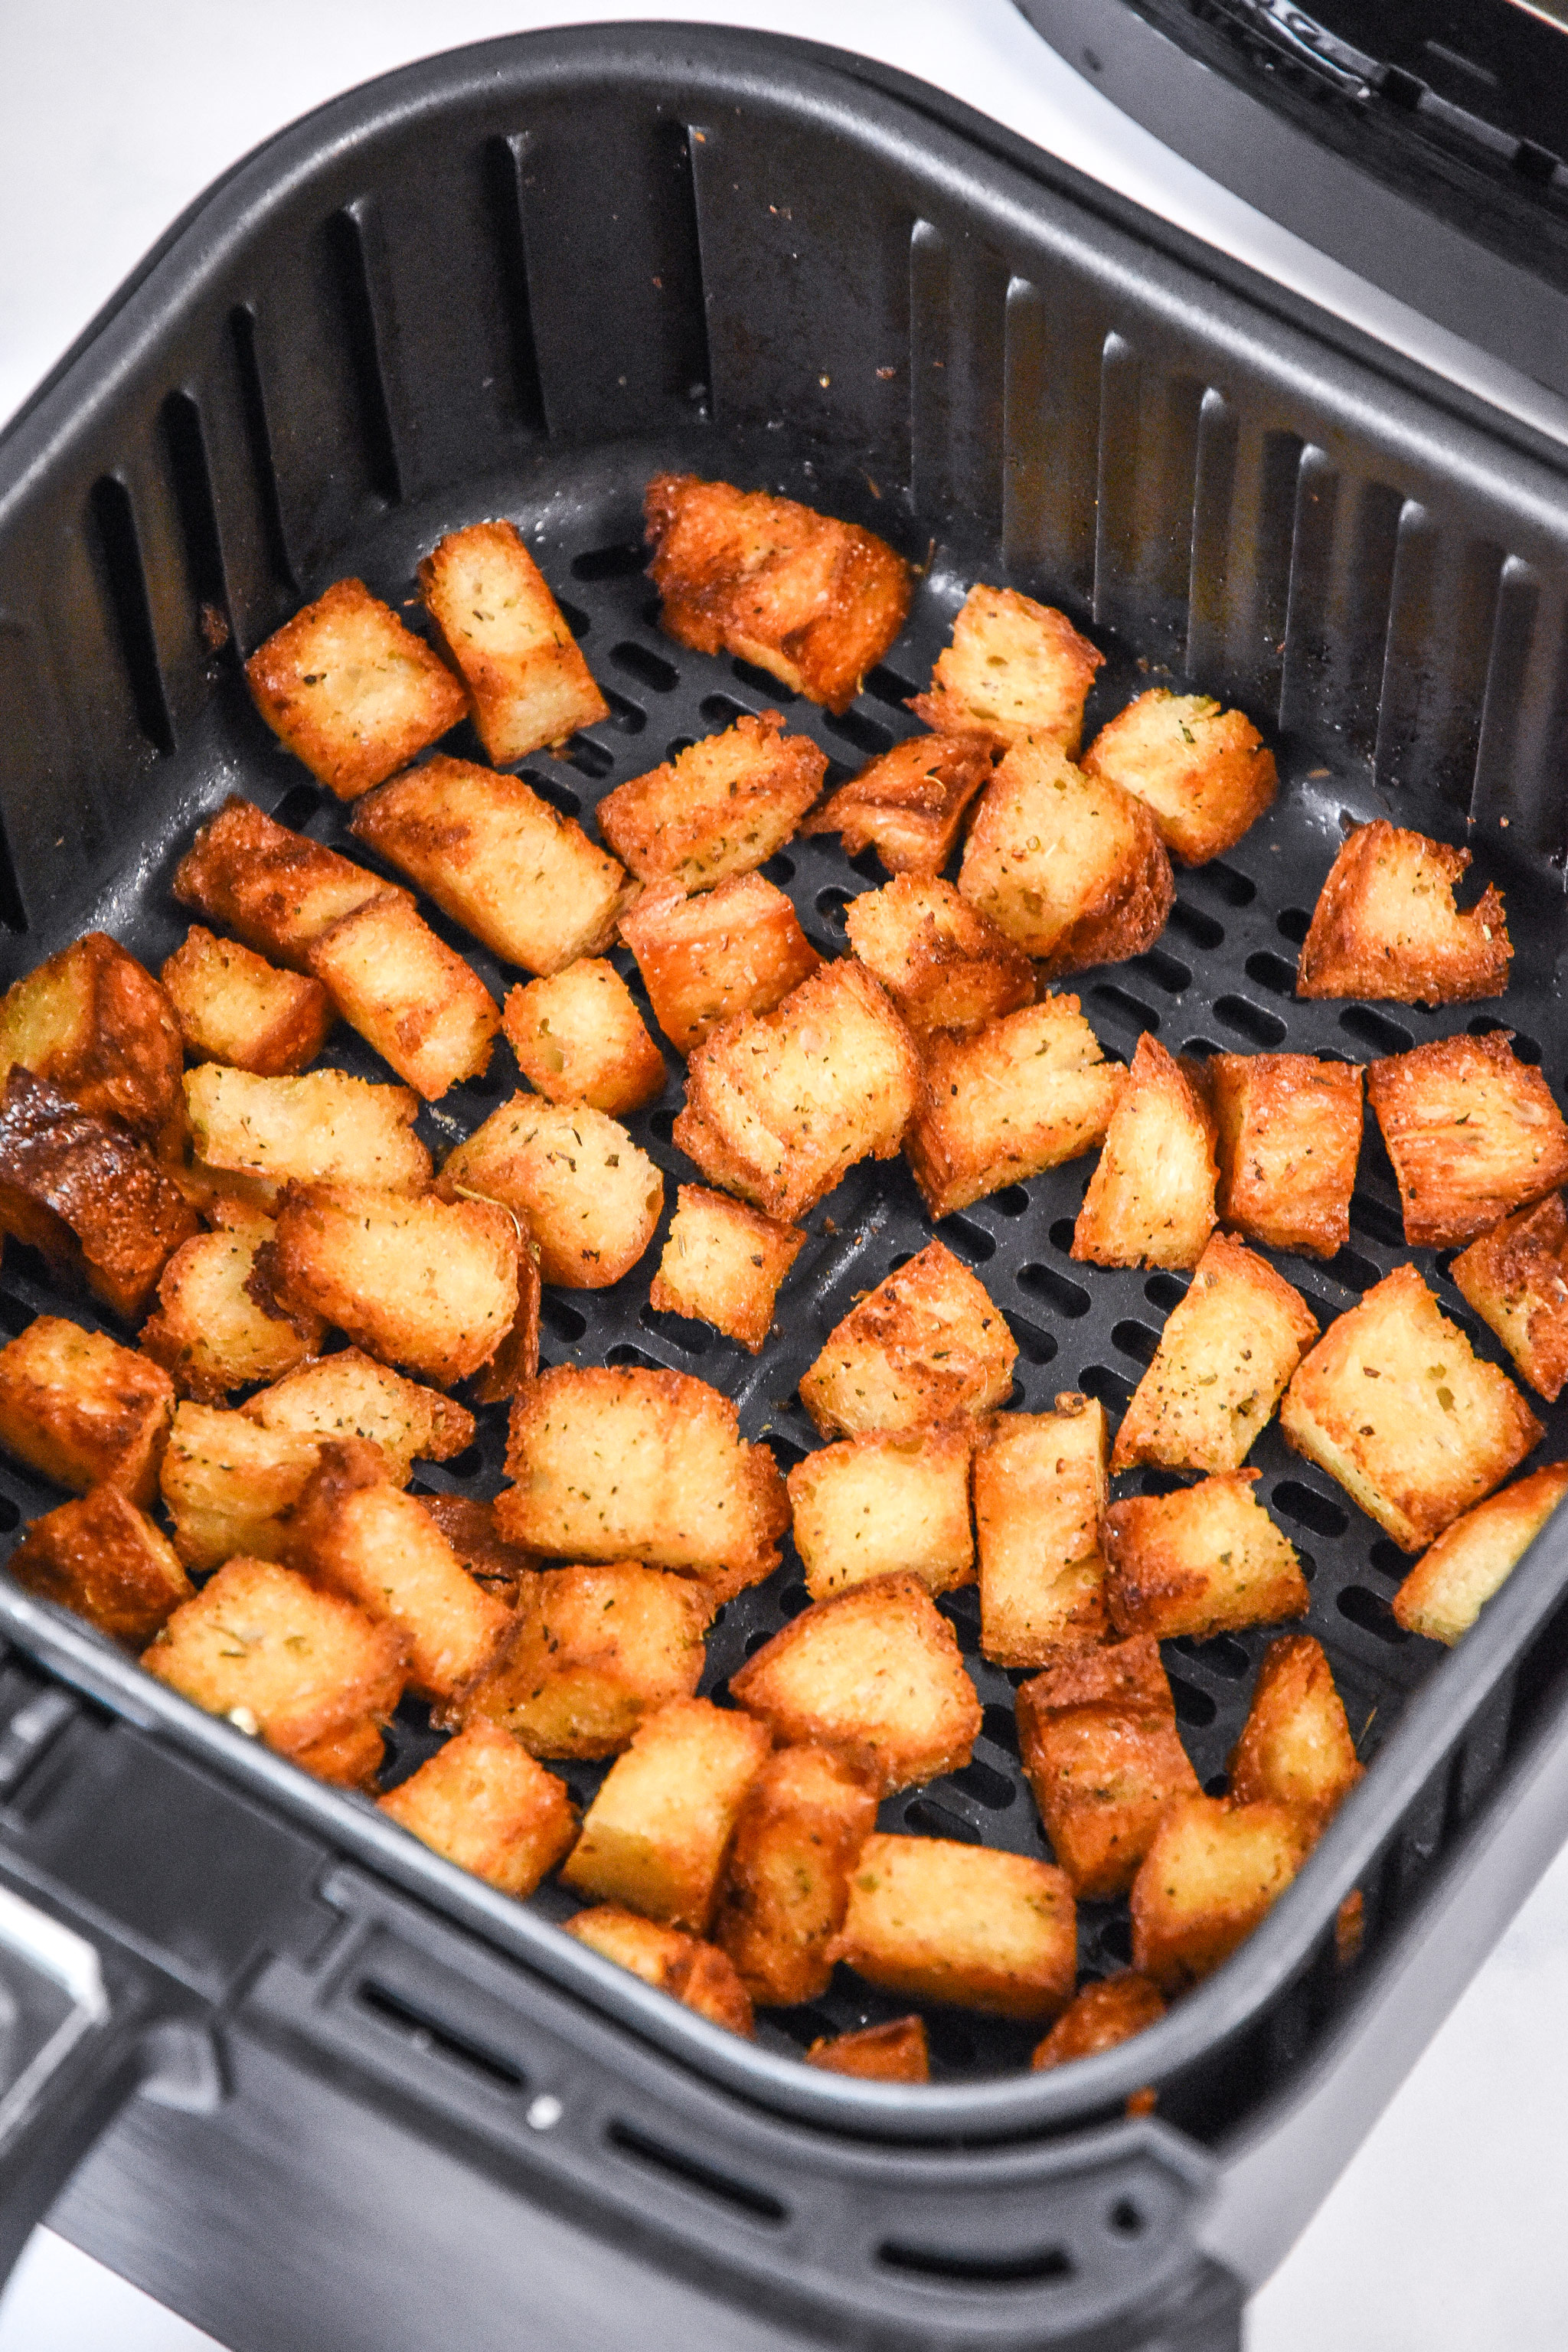 How to Make Croutons in an Air Fryer